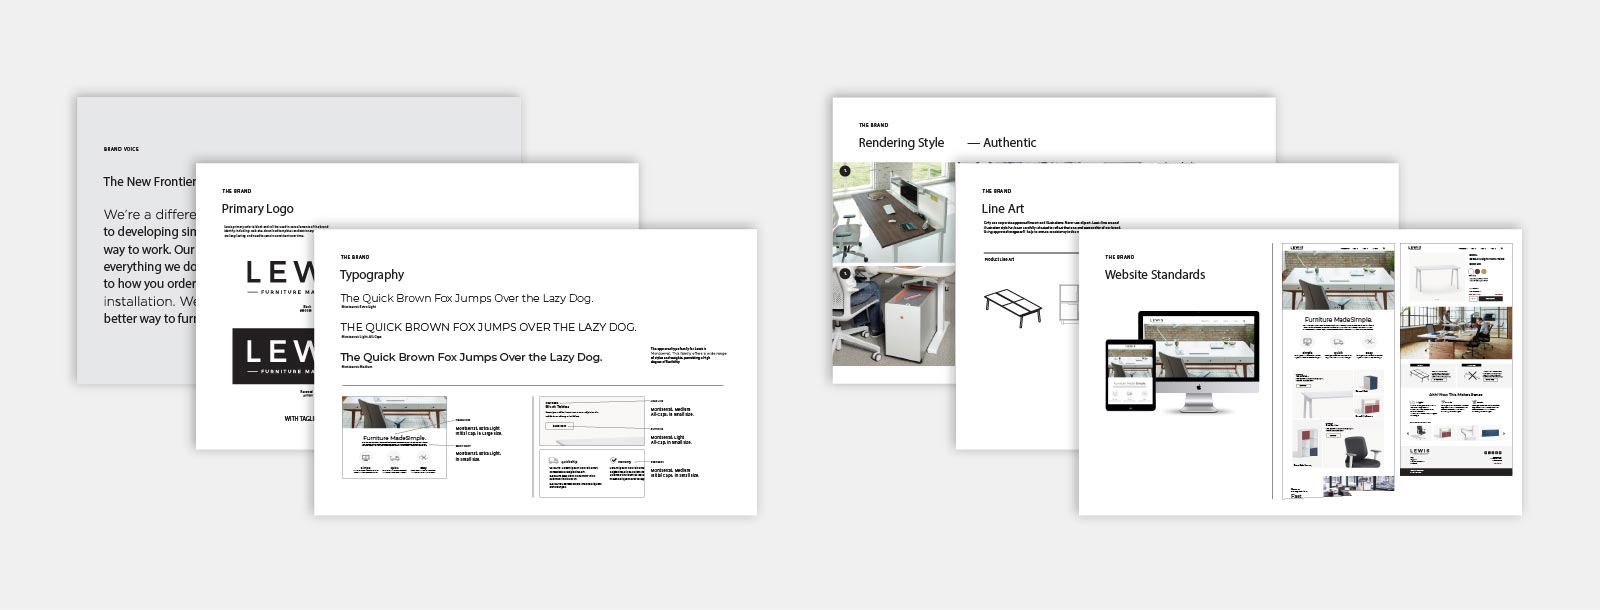 Sample screenshot from the Lewis brand guidelines showing the typography and logo usage.